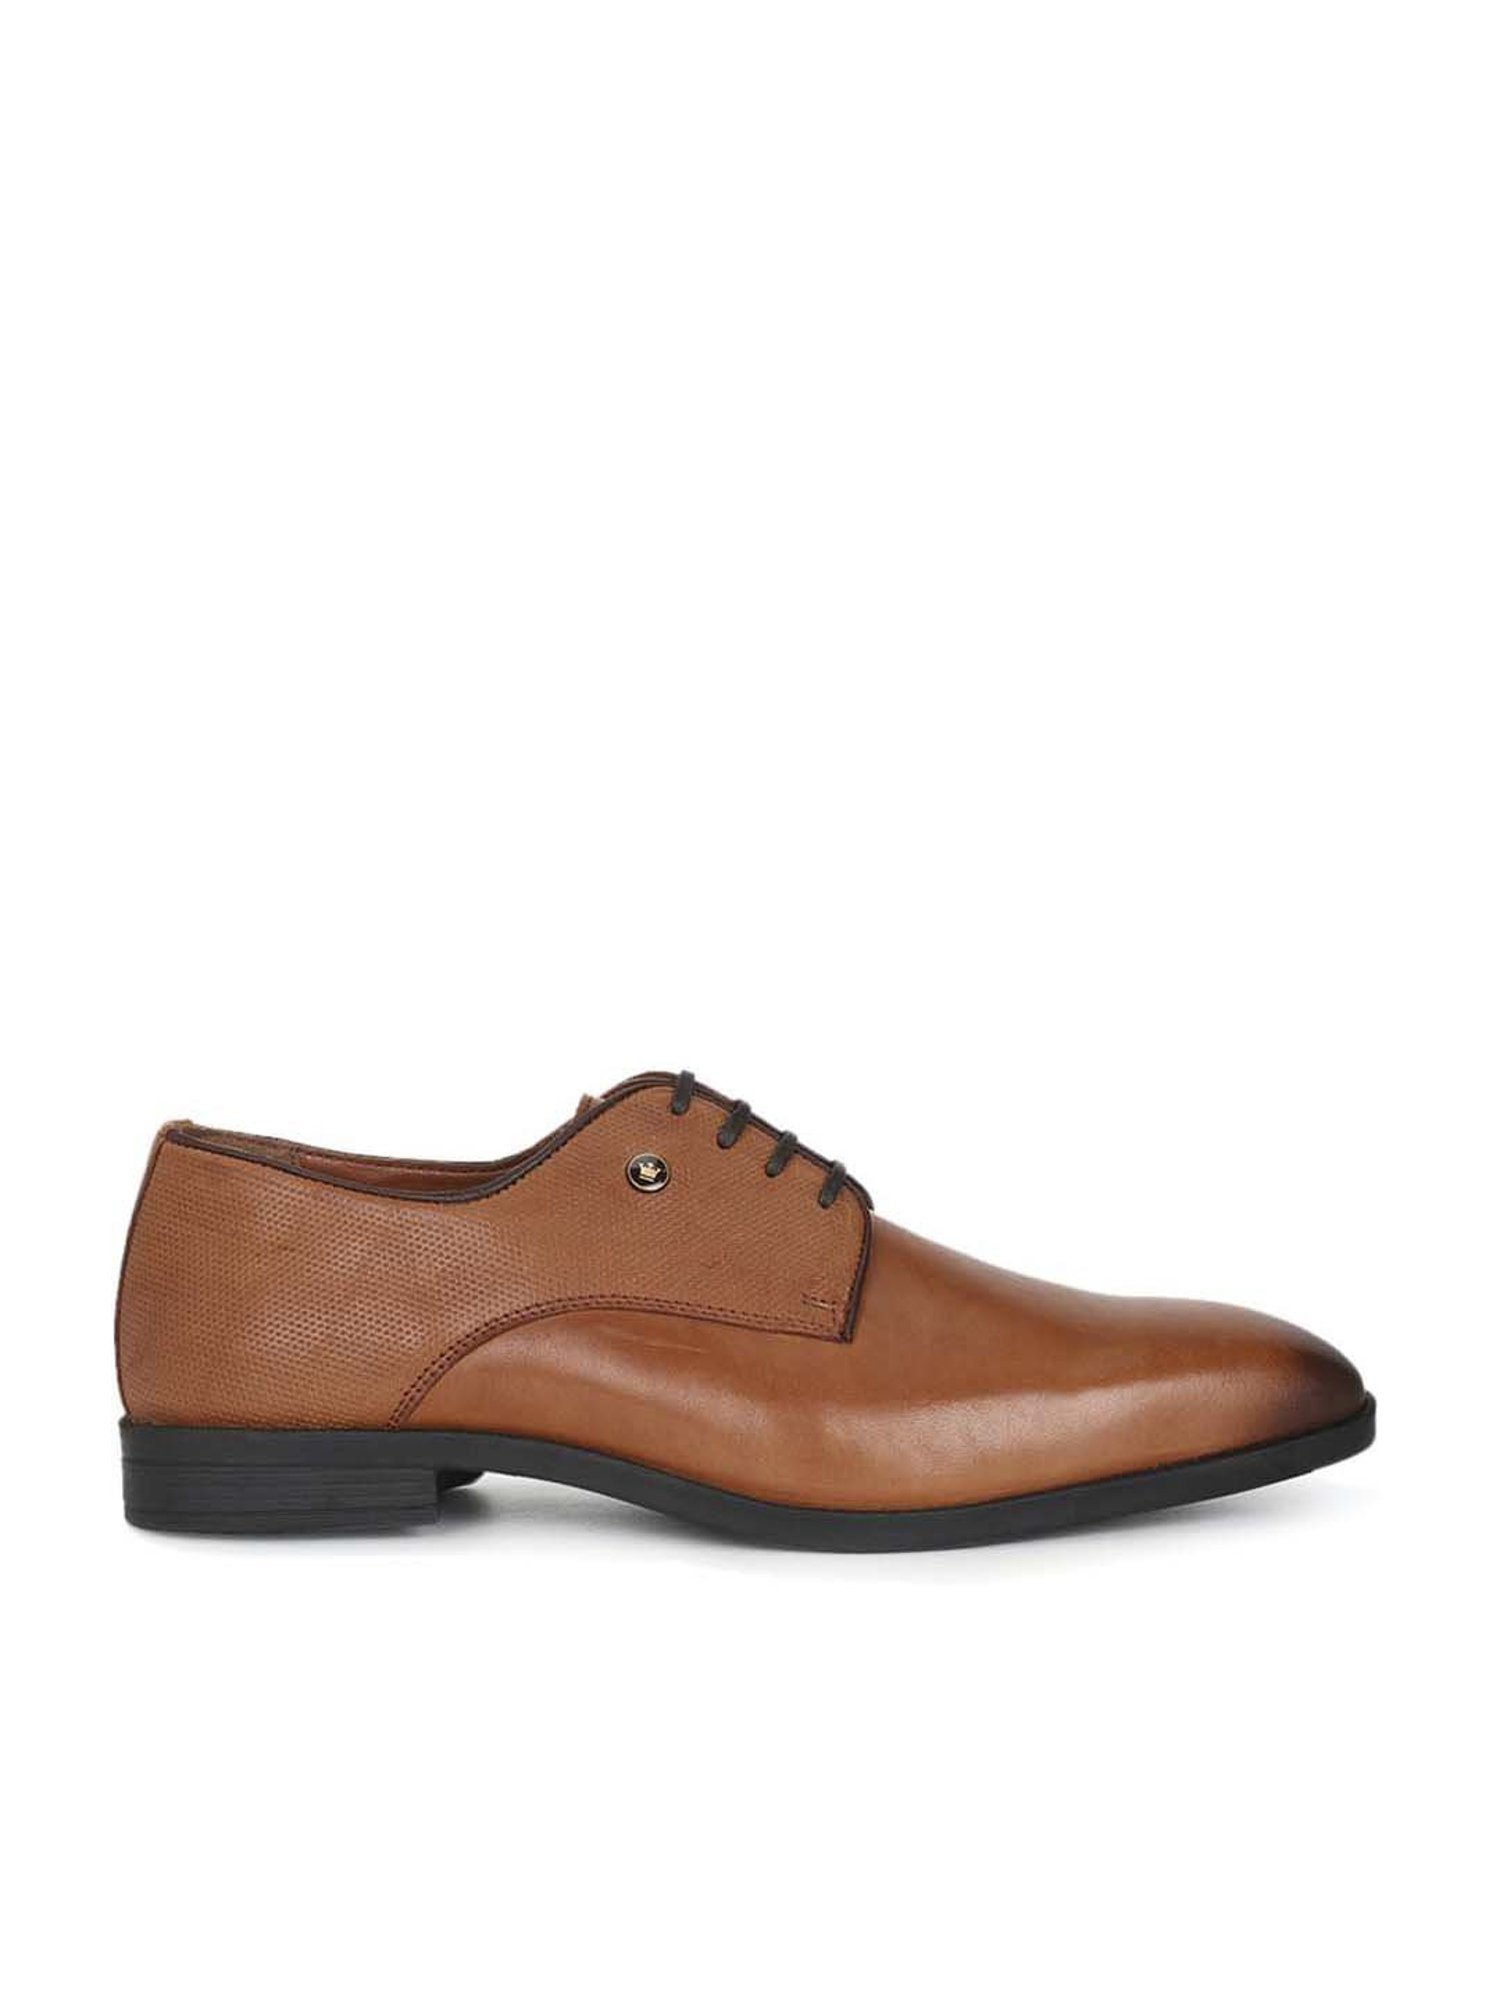 Buy Louis Philippe Men's Brown Derby Shoes for Men at Best Price @ Tata CLiQ